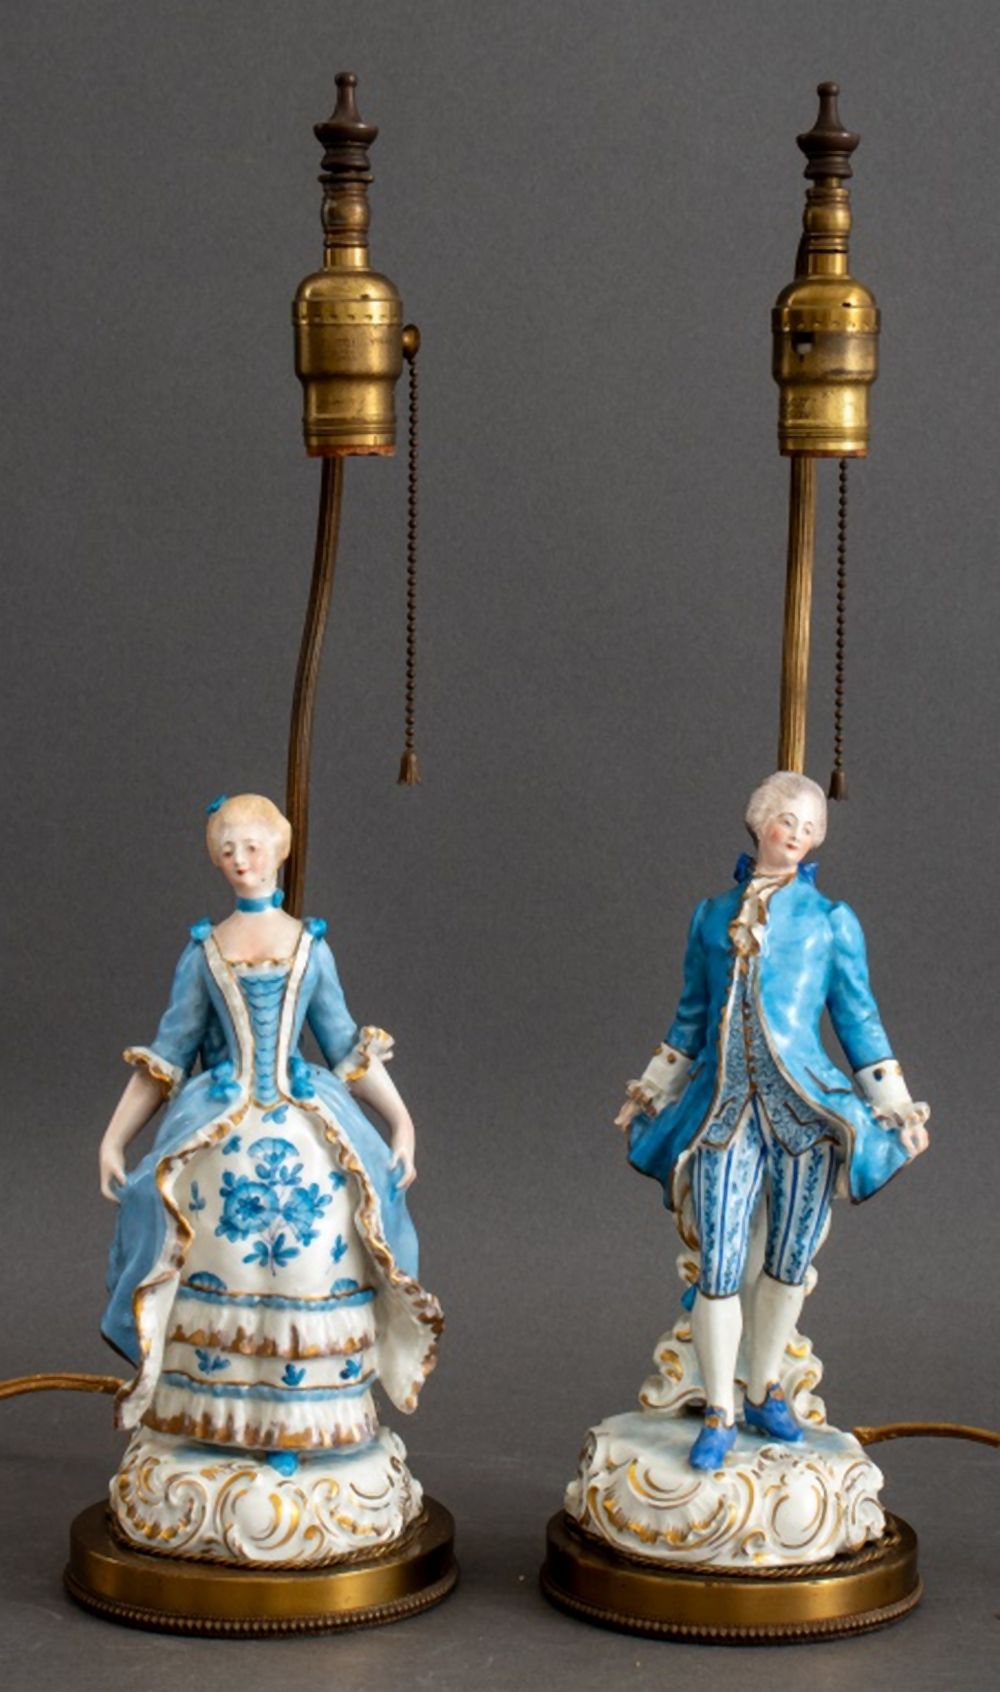 PAIR OF DRESDEN STYLE COURTIERS 35ffb0